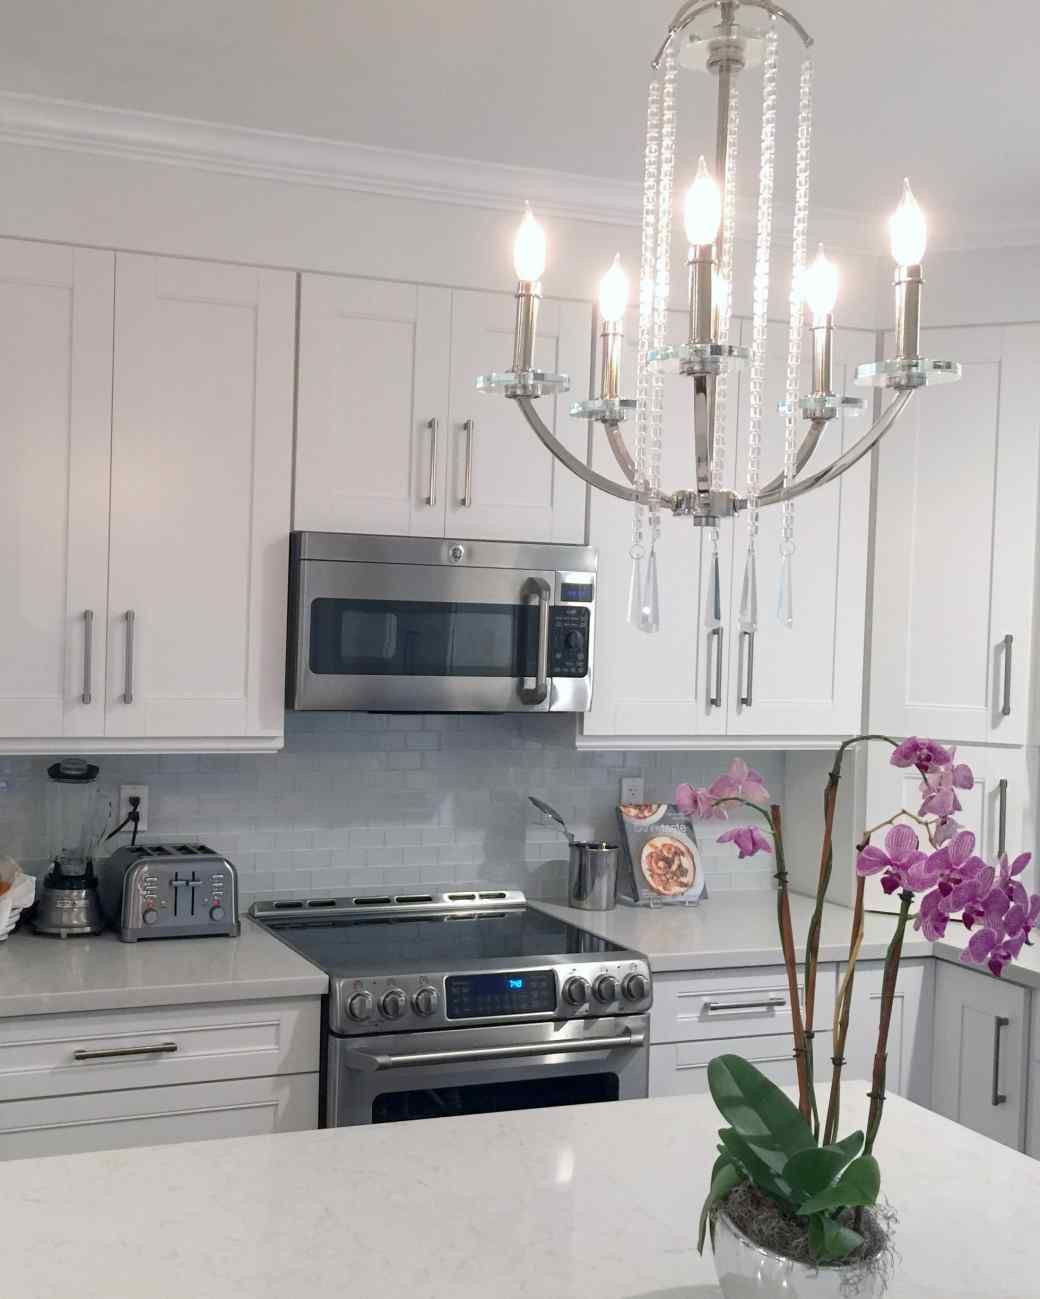 Bright Kitchen Ceiling Lights
 6 Bright Kitchen Lighting Ideas See How New Fixtures